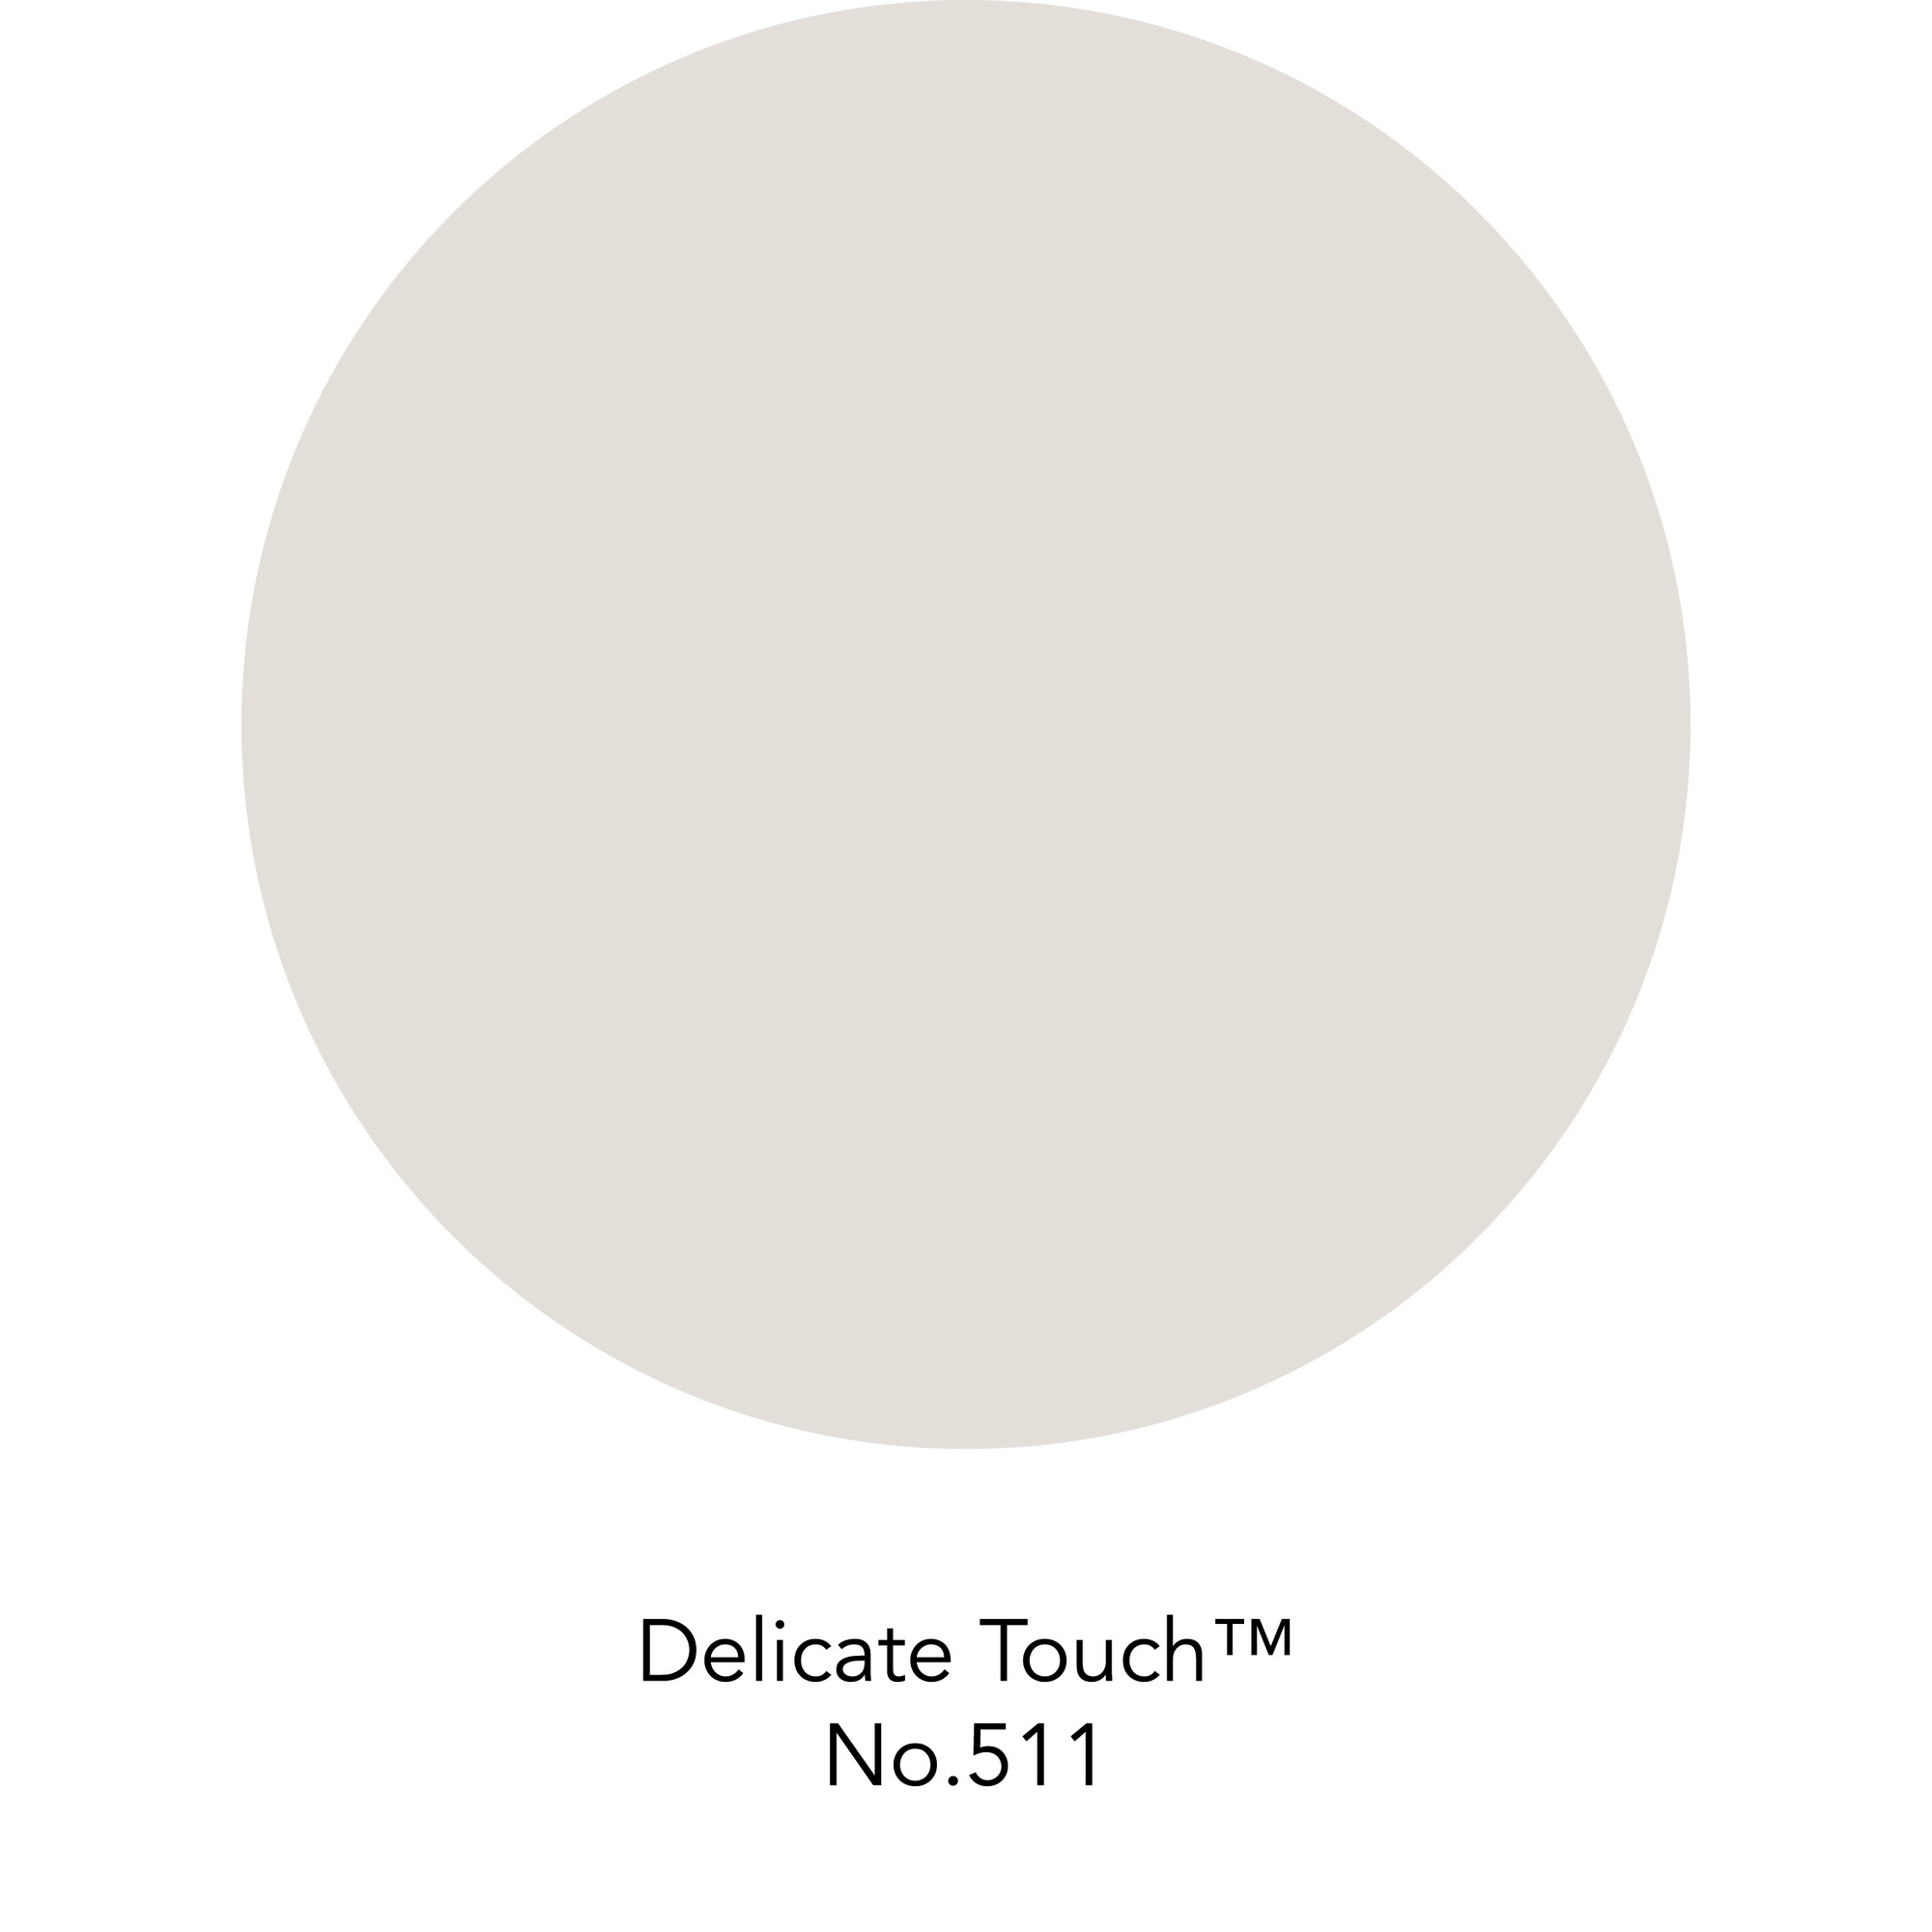 Wandfarbe 'Delicate Touch No. 511' beige matt 2,5 l + product picture